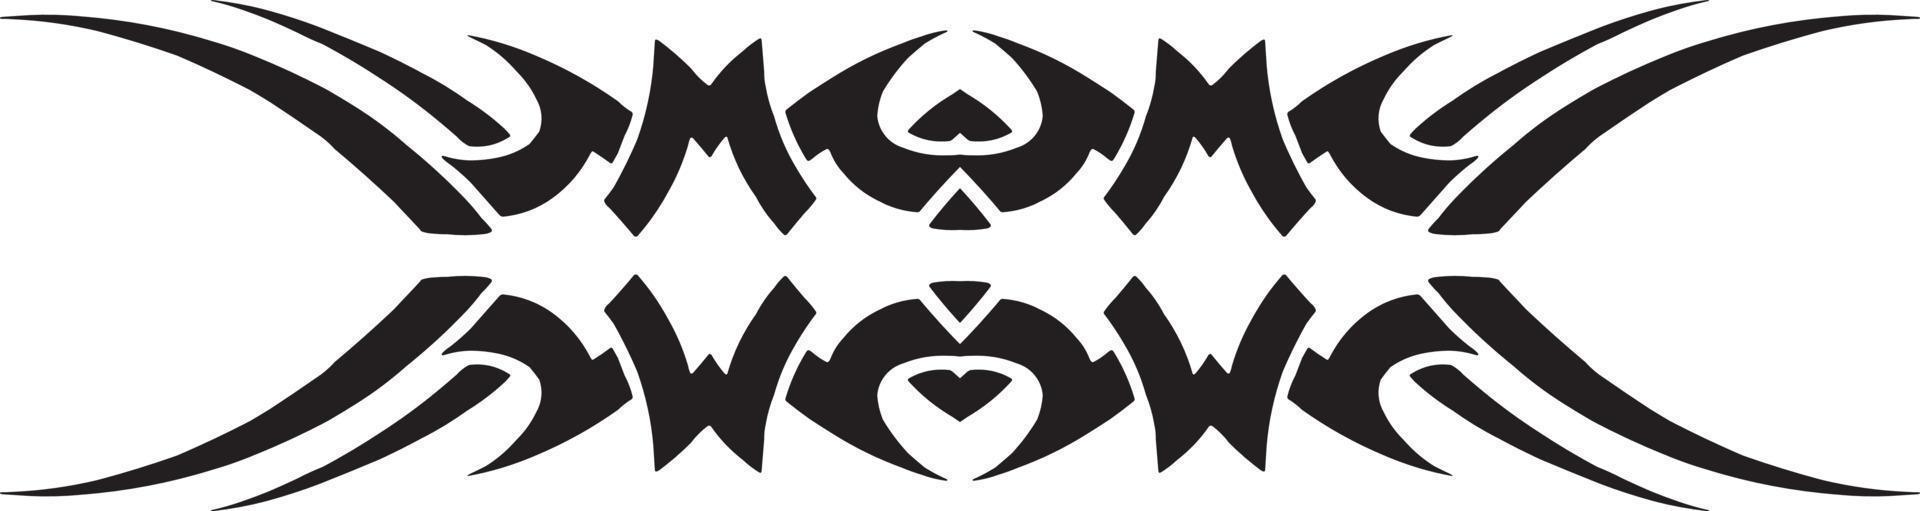 Tribal Vector Shape For Your Tattoo Designs